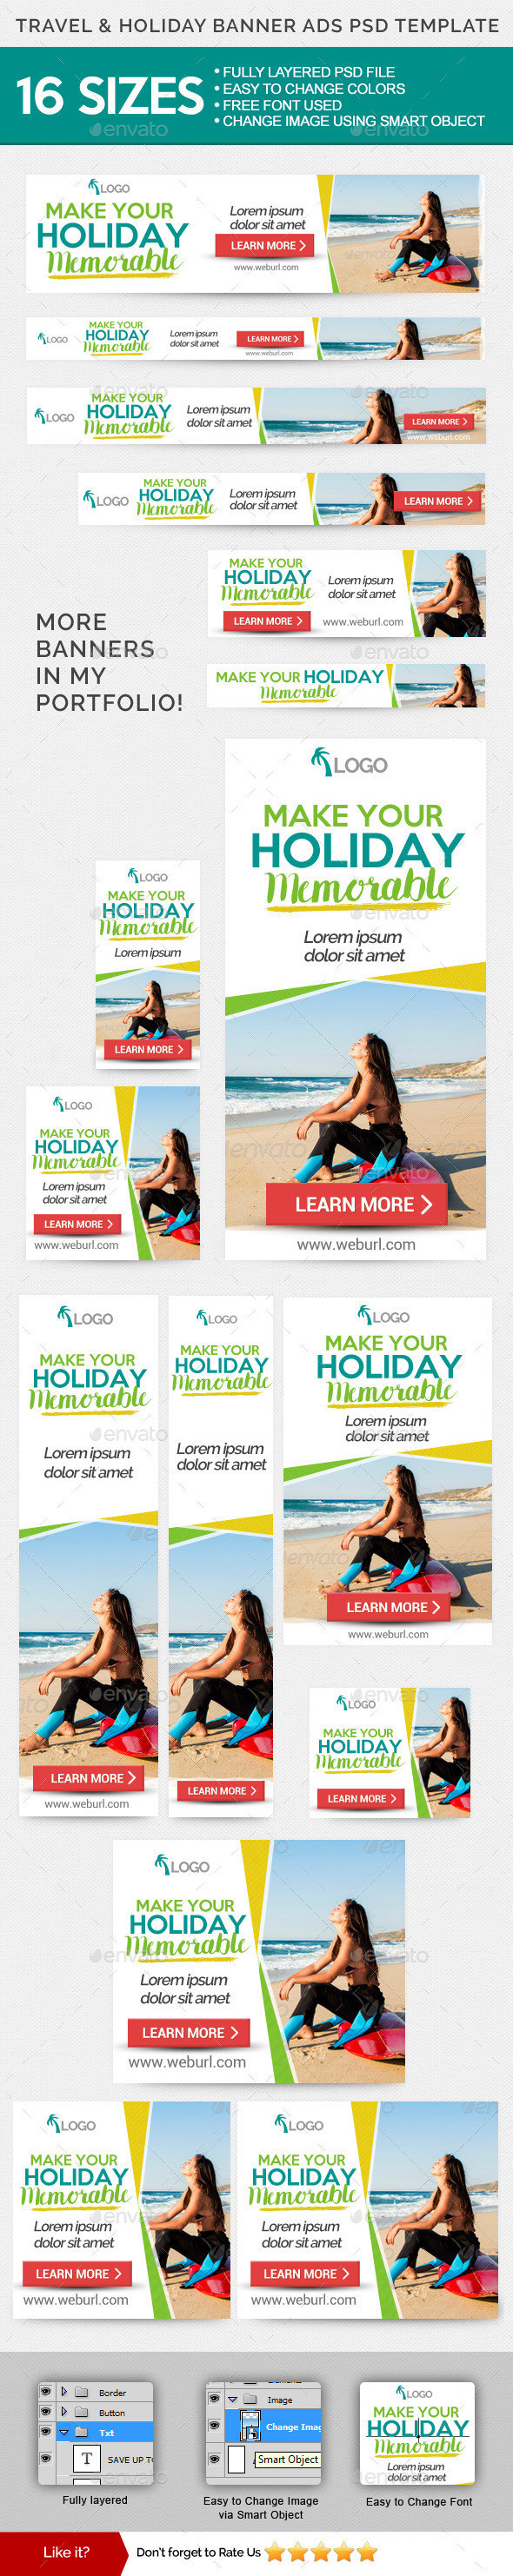 Travel   holiday banner ads psd template